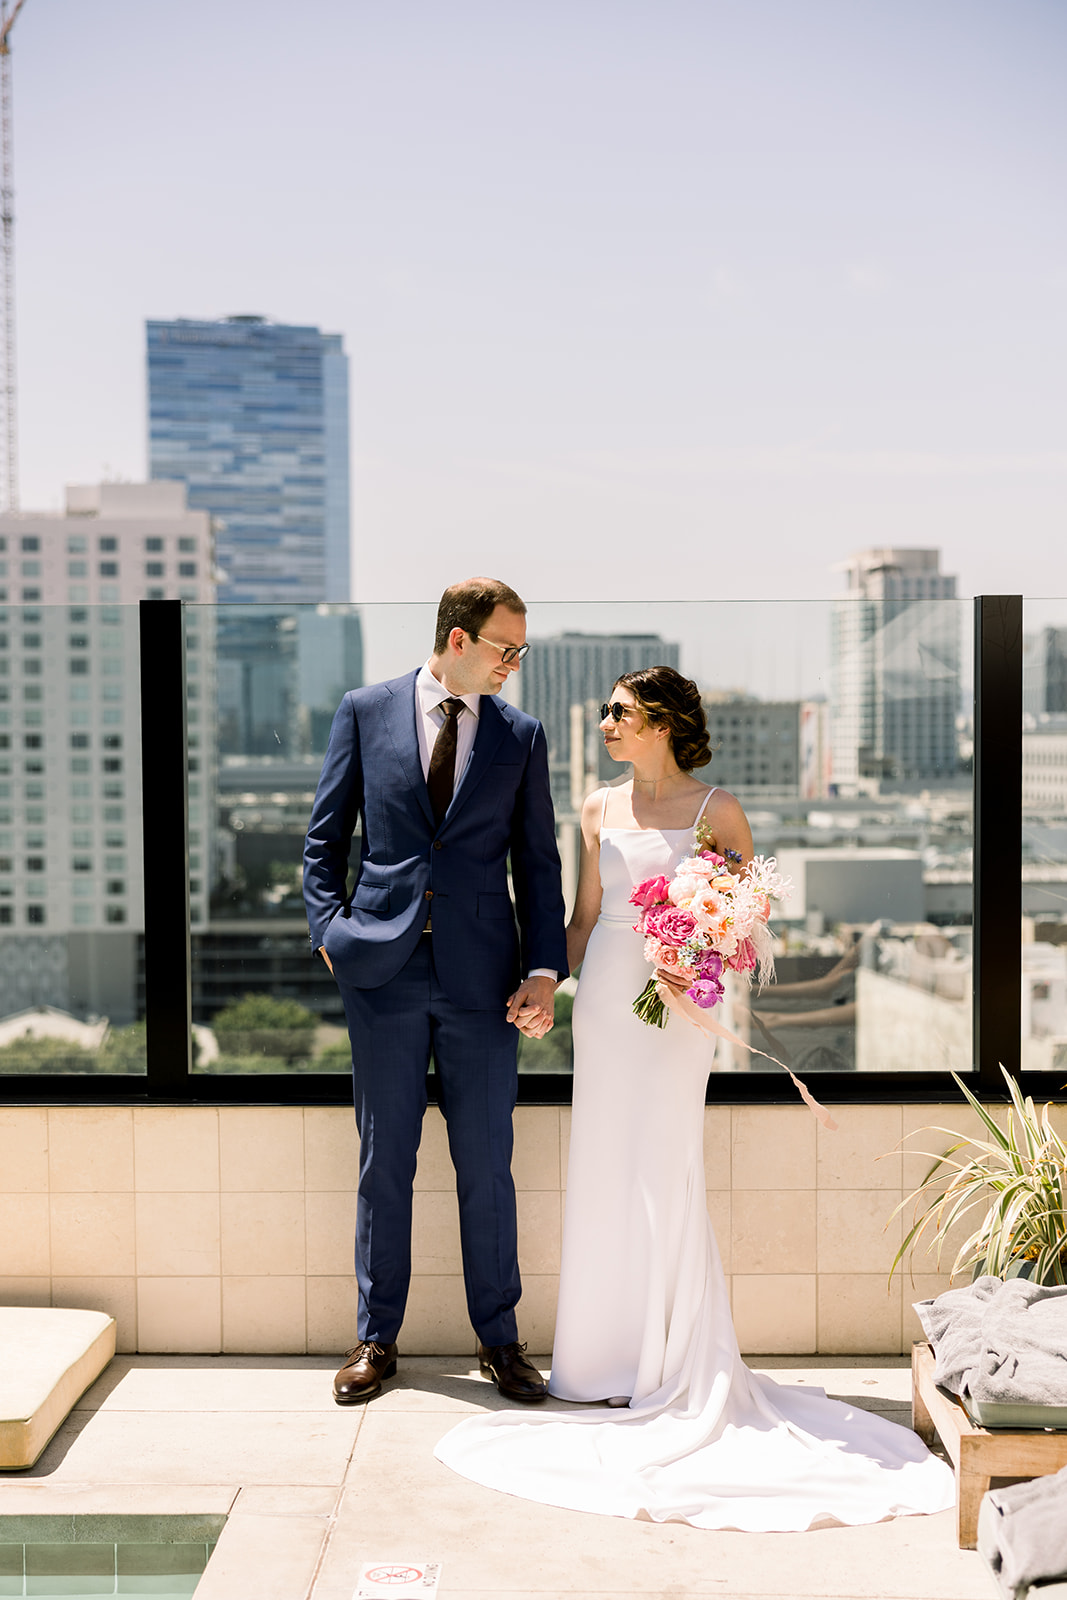 bride in contemporary spaghetti strap dress and groom in navy suit with black tie stand on rooftop with DTLA skyline in background